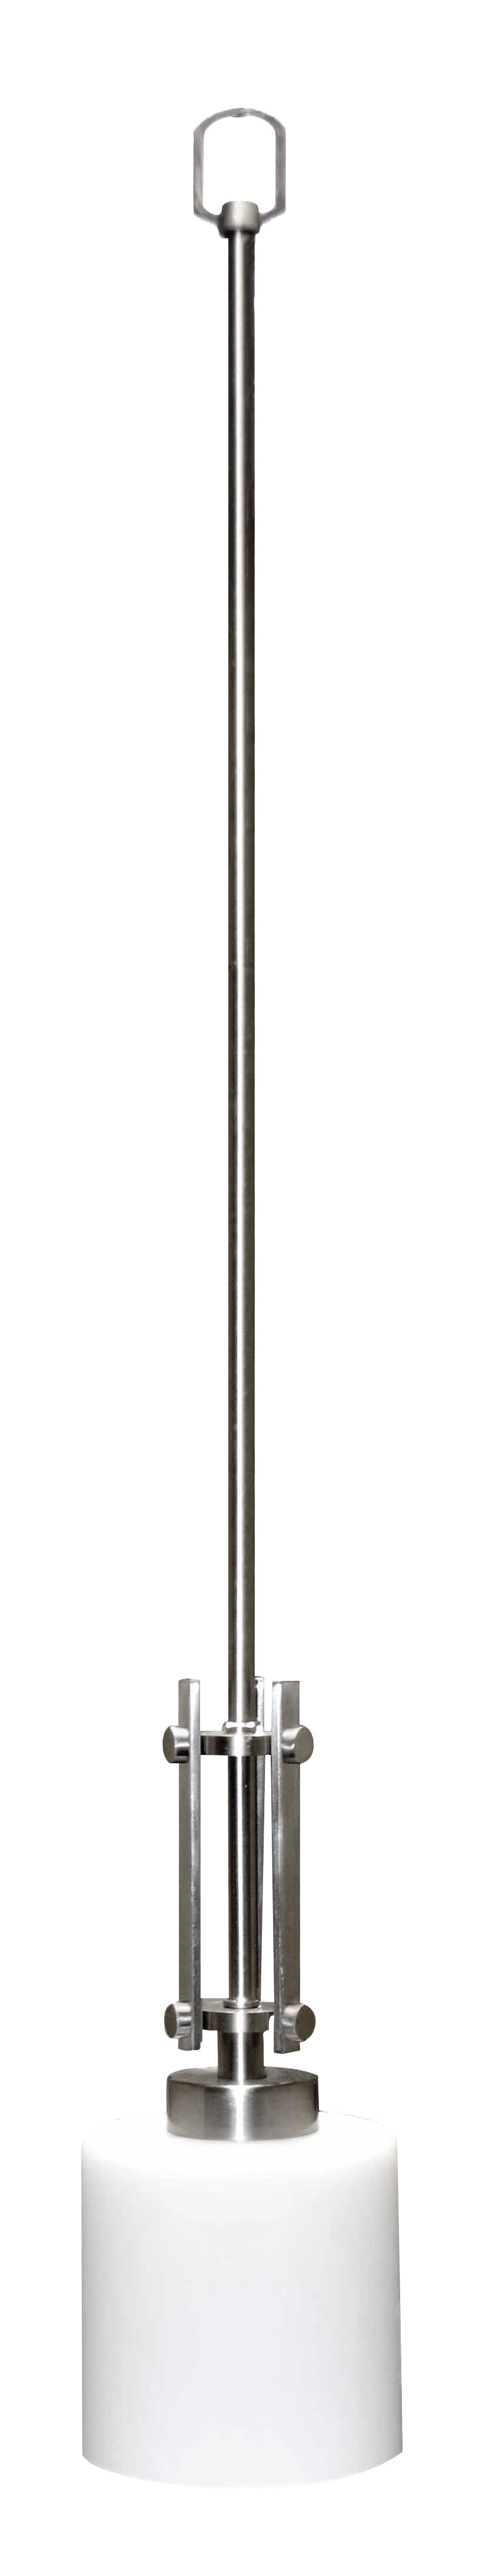 1-Light Brushed Nickel Pendant with White Glass